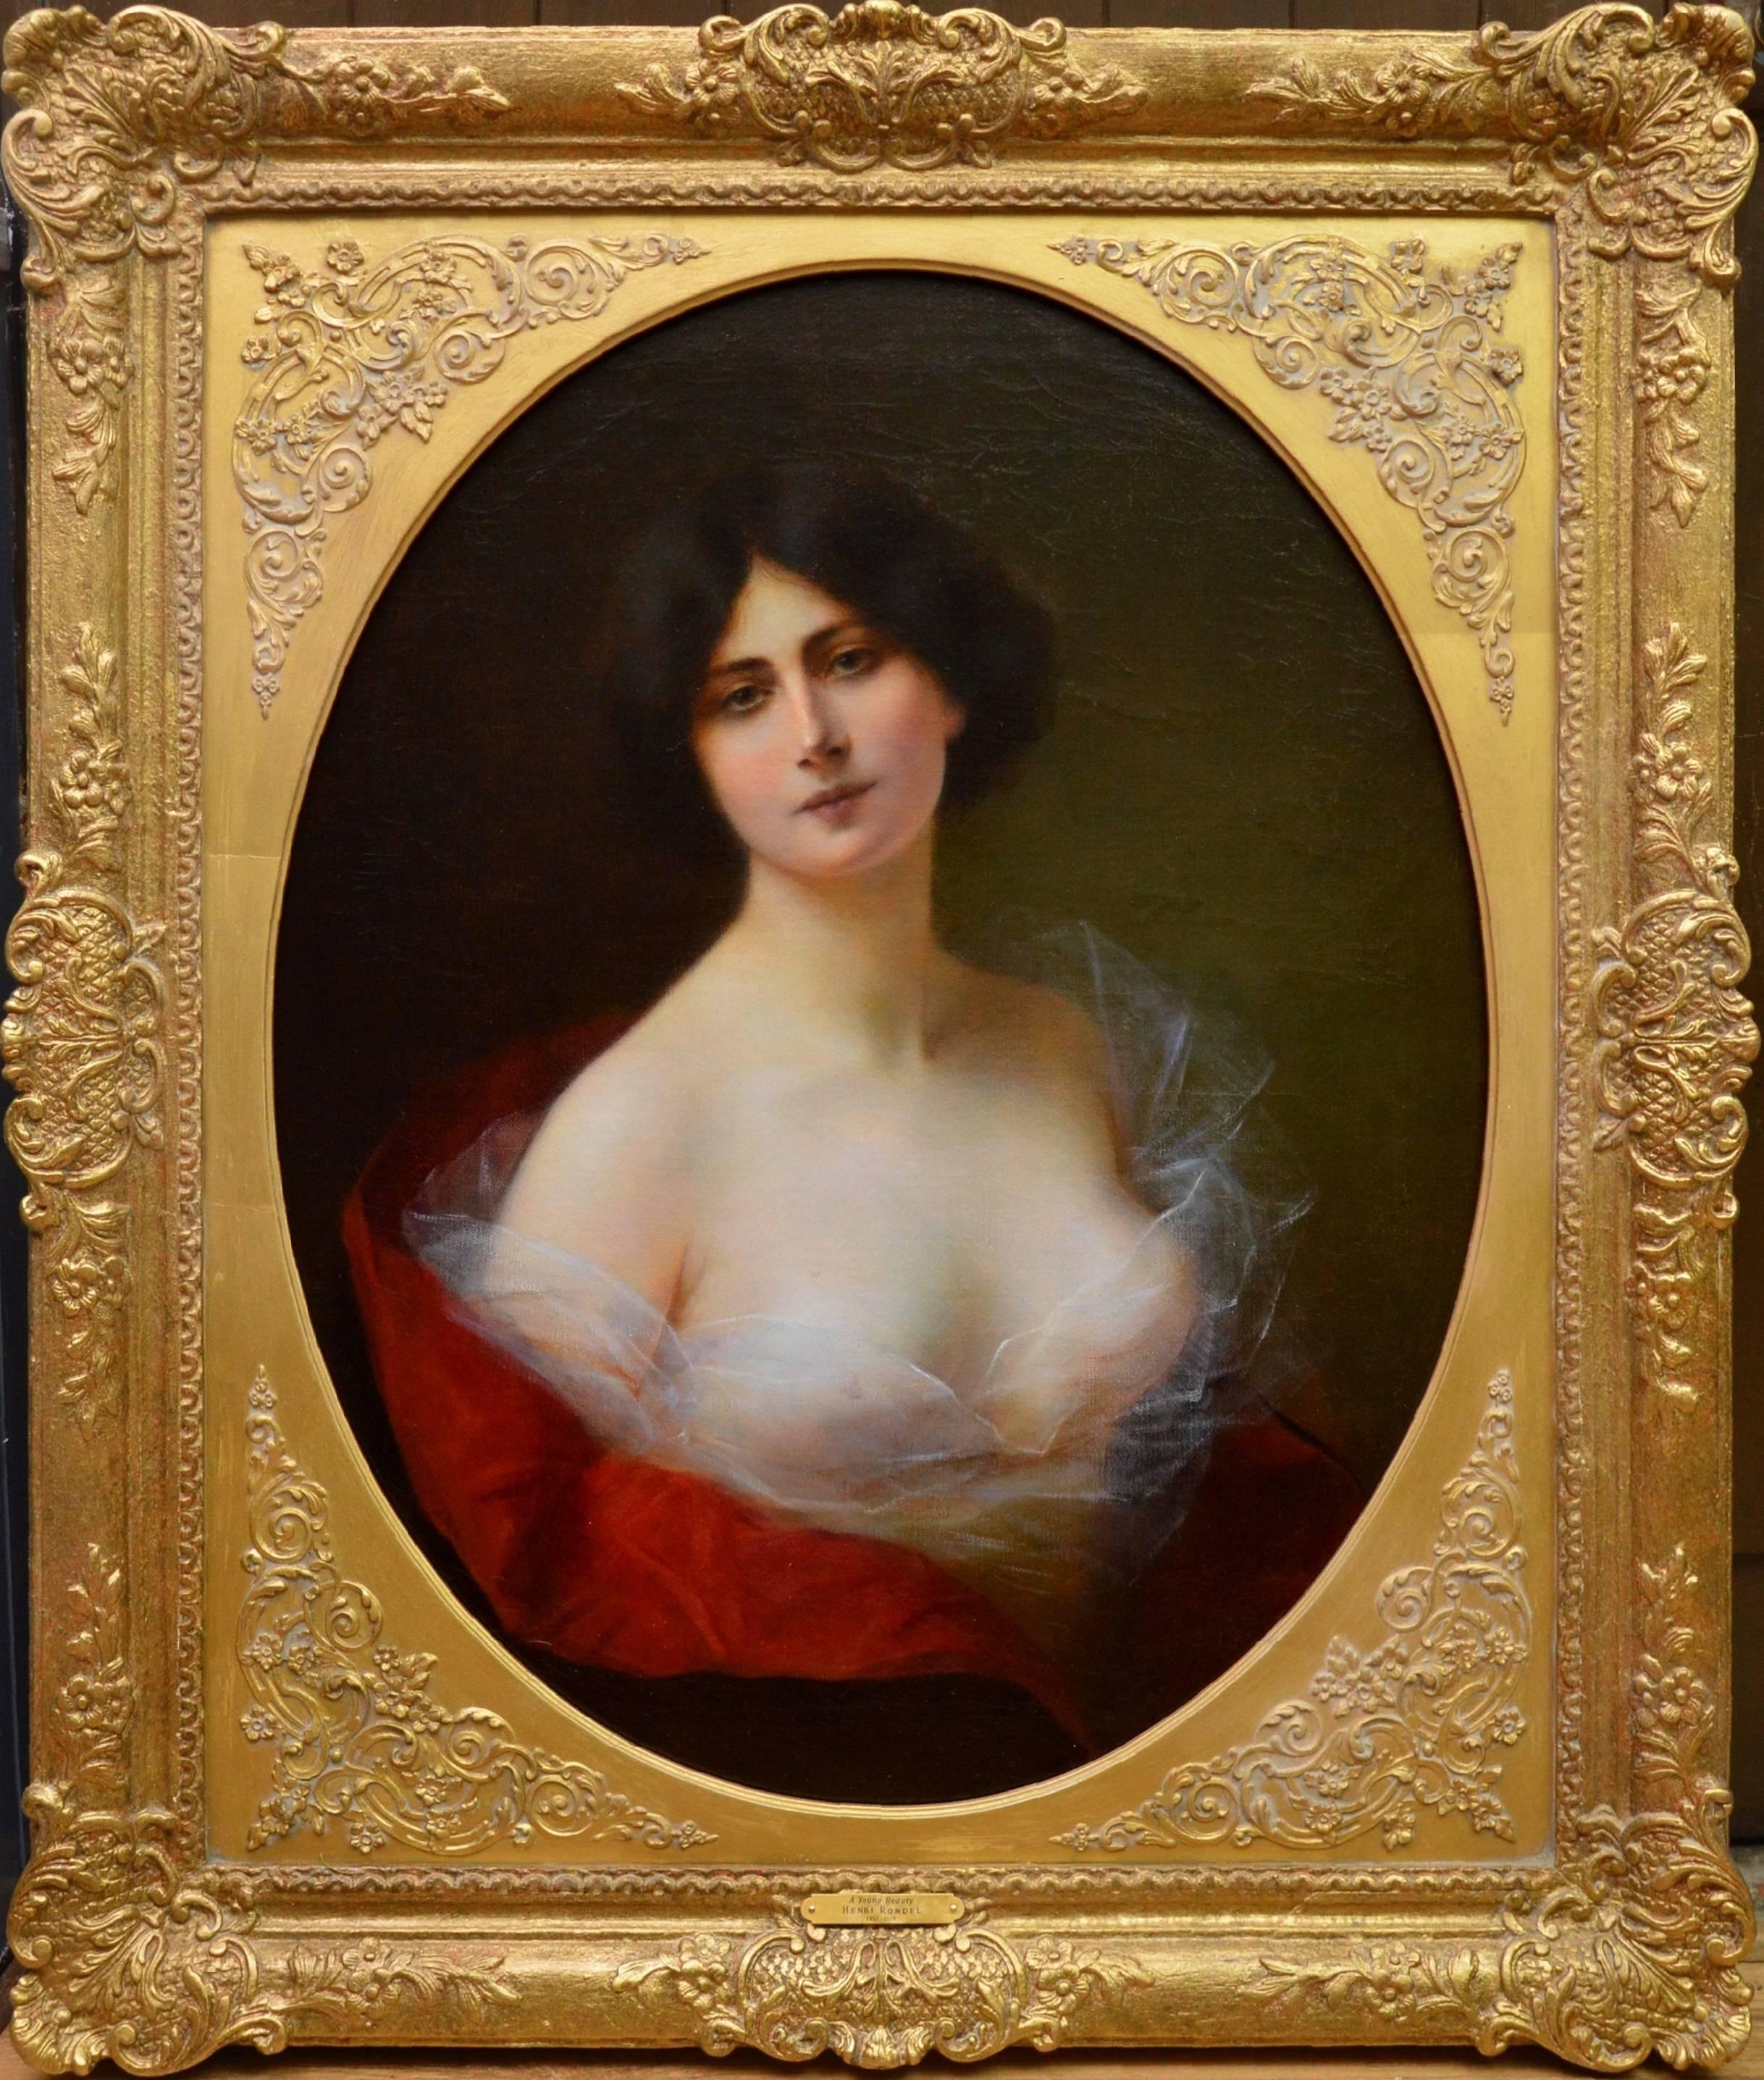 Henri Rondel Figurative Painting - A Young Beauty - 19th Century French Oil Painting circa 1885 - Nude